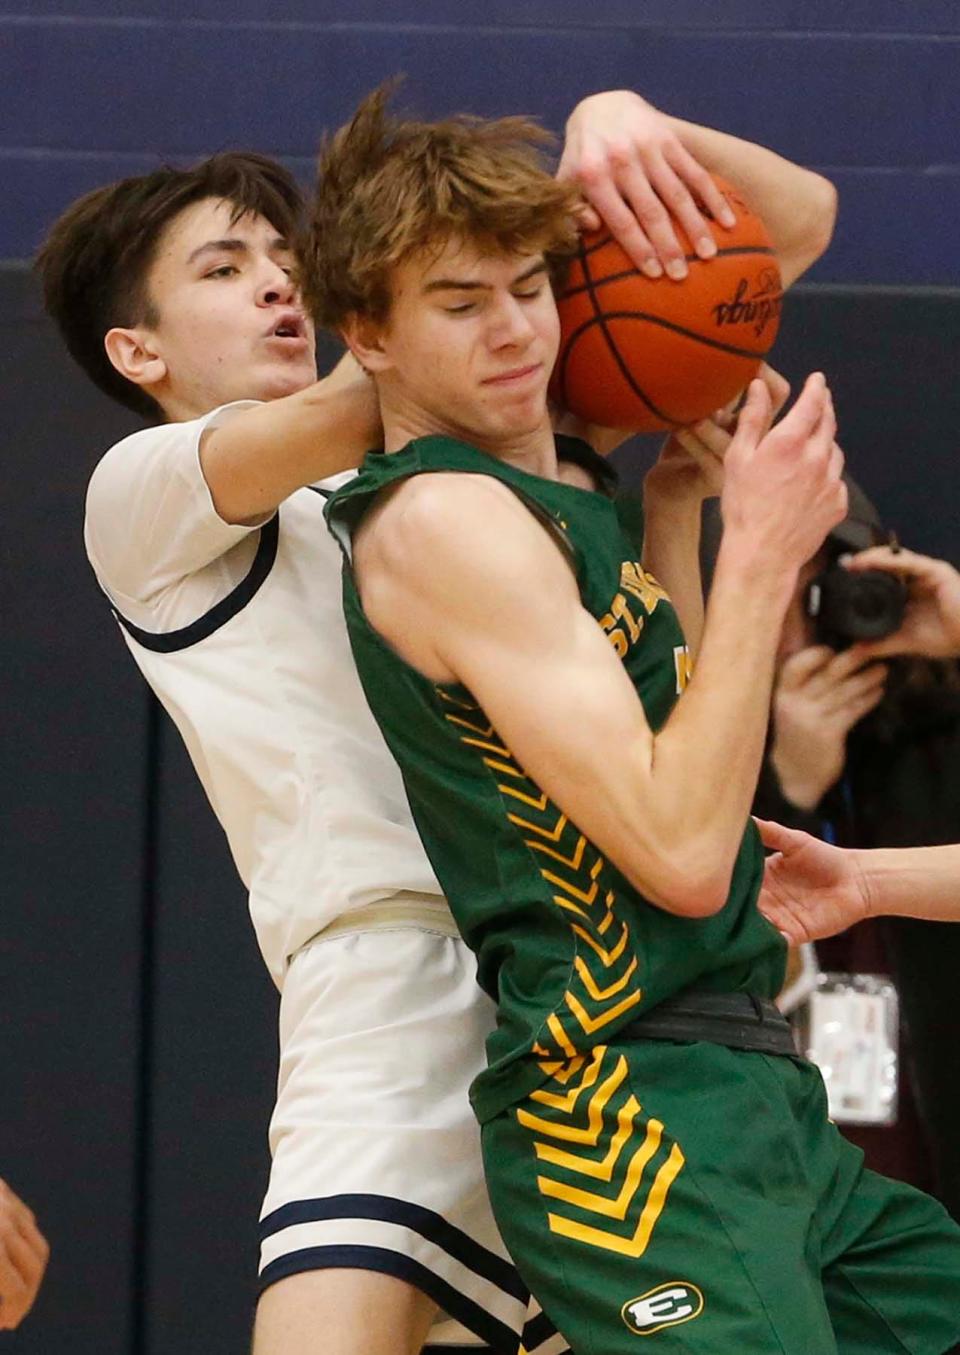 Archbishop Hoban's Andrew Griffith, left, and Lakewood St. Edward's Cam Grant battle for a rebound during the third period of their Division I regional final Saturday at Copley. St. Edward won 63-46. [Karen Schiely/Beacon Journal]